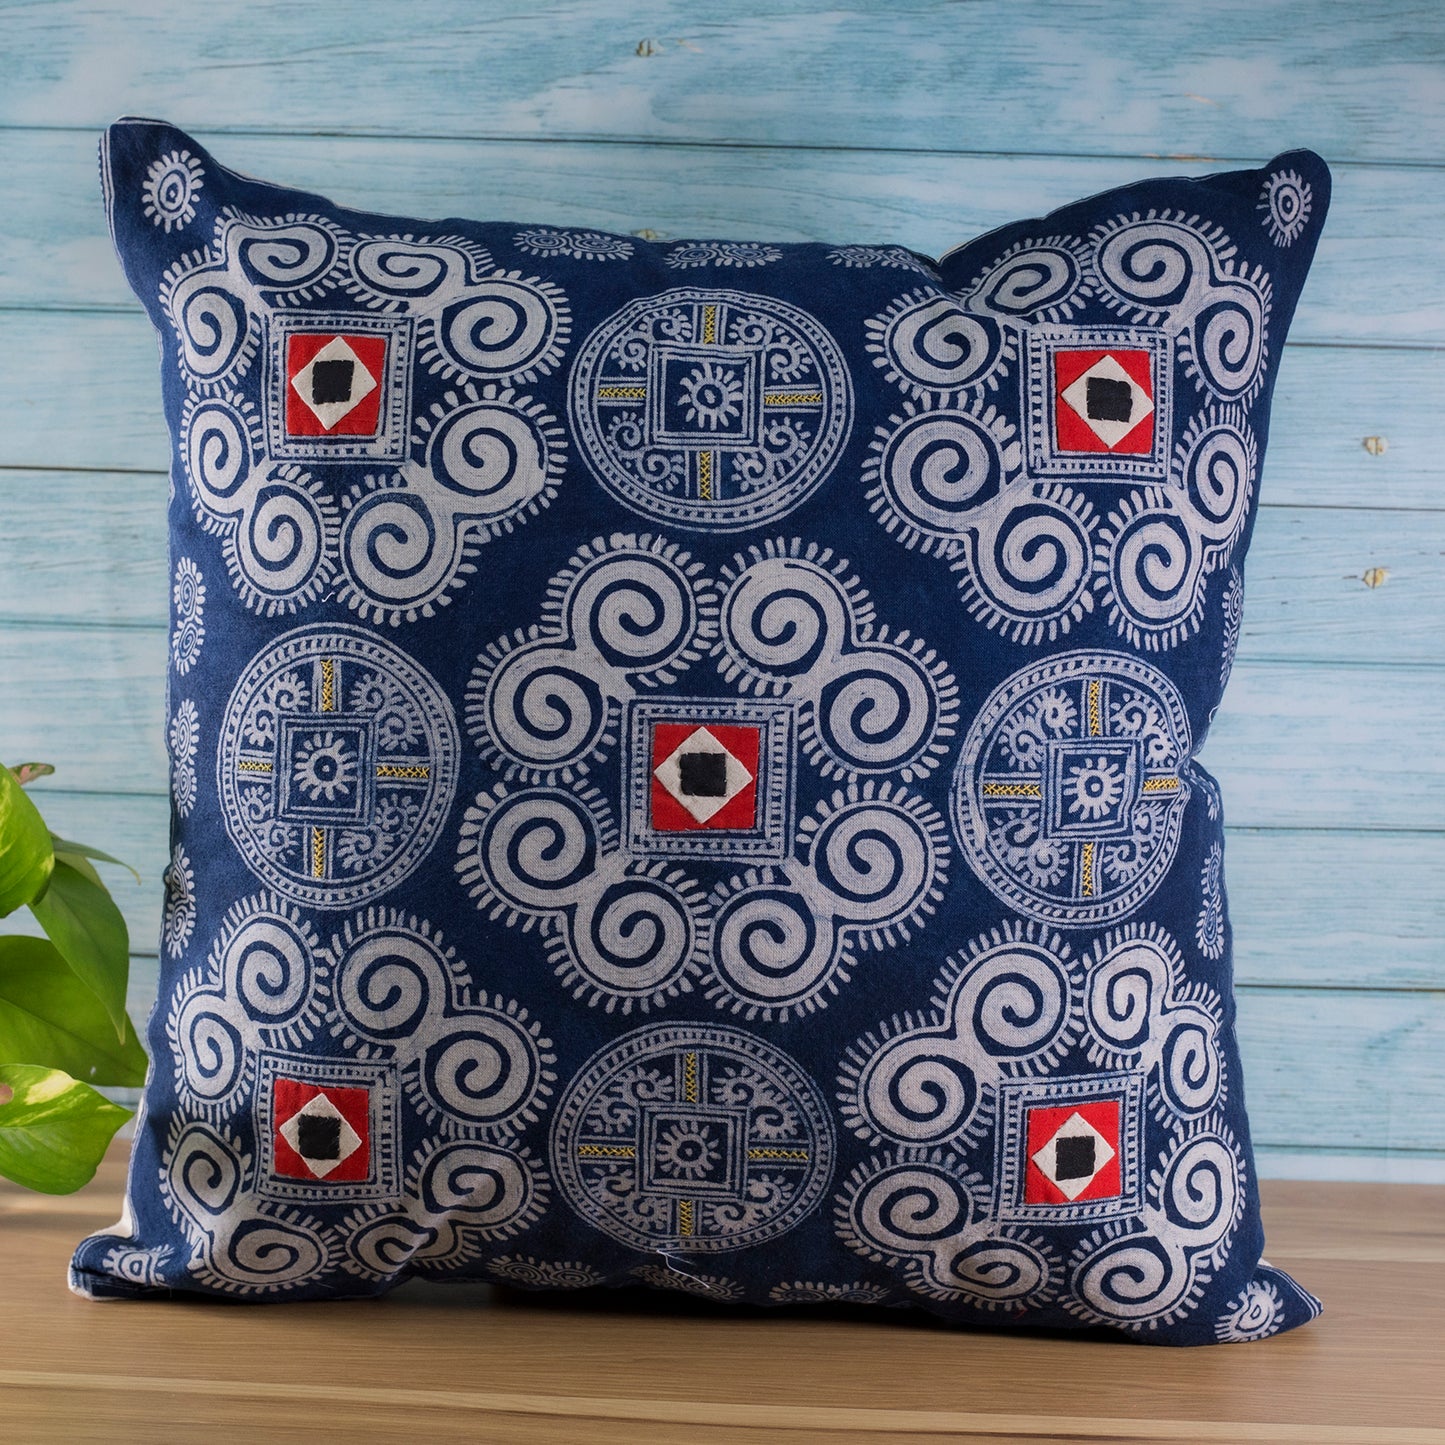 Batik Cushion Cover - H'mong pattern, hand-stitched fabric patch